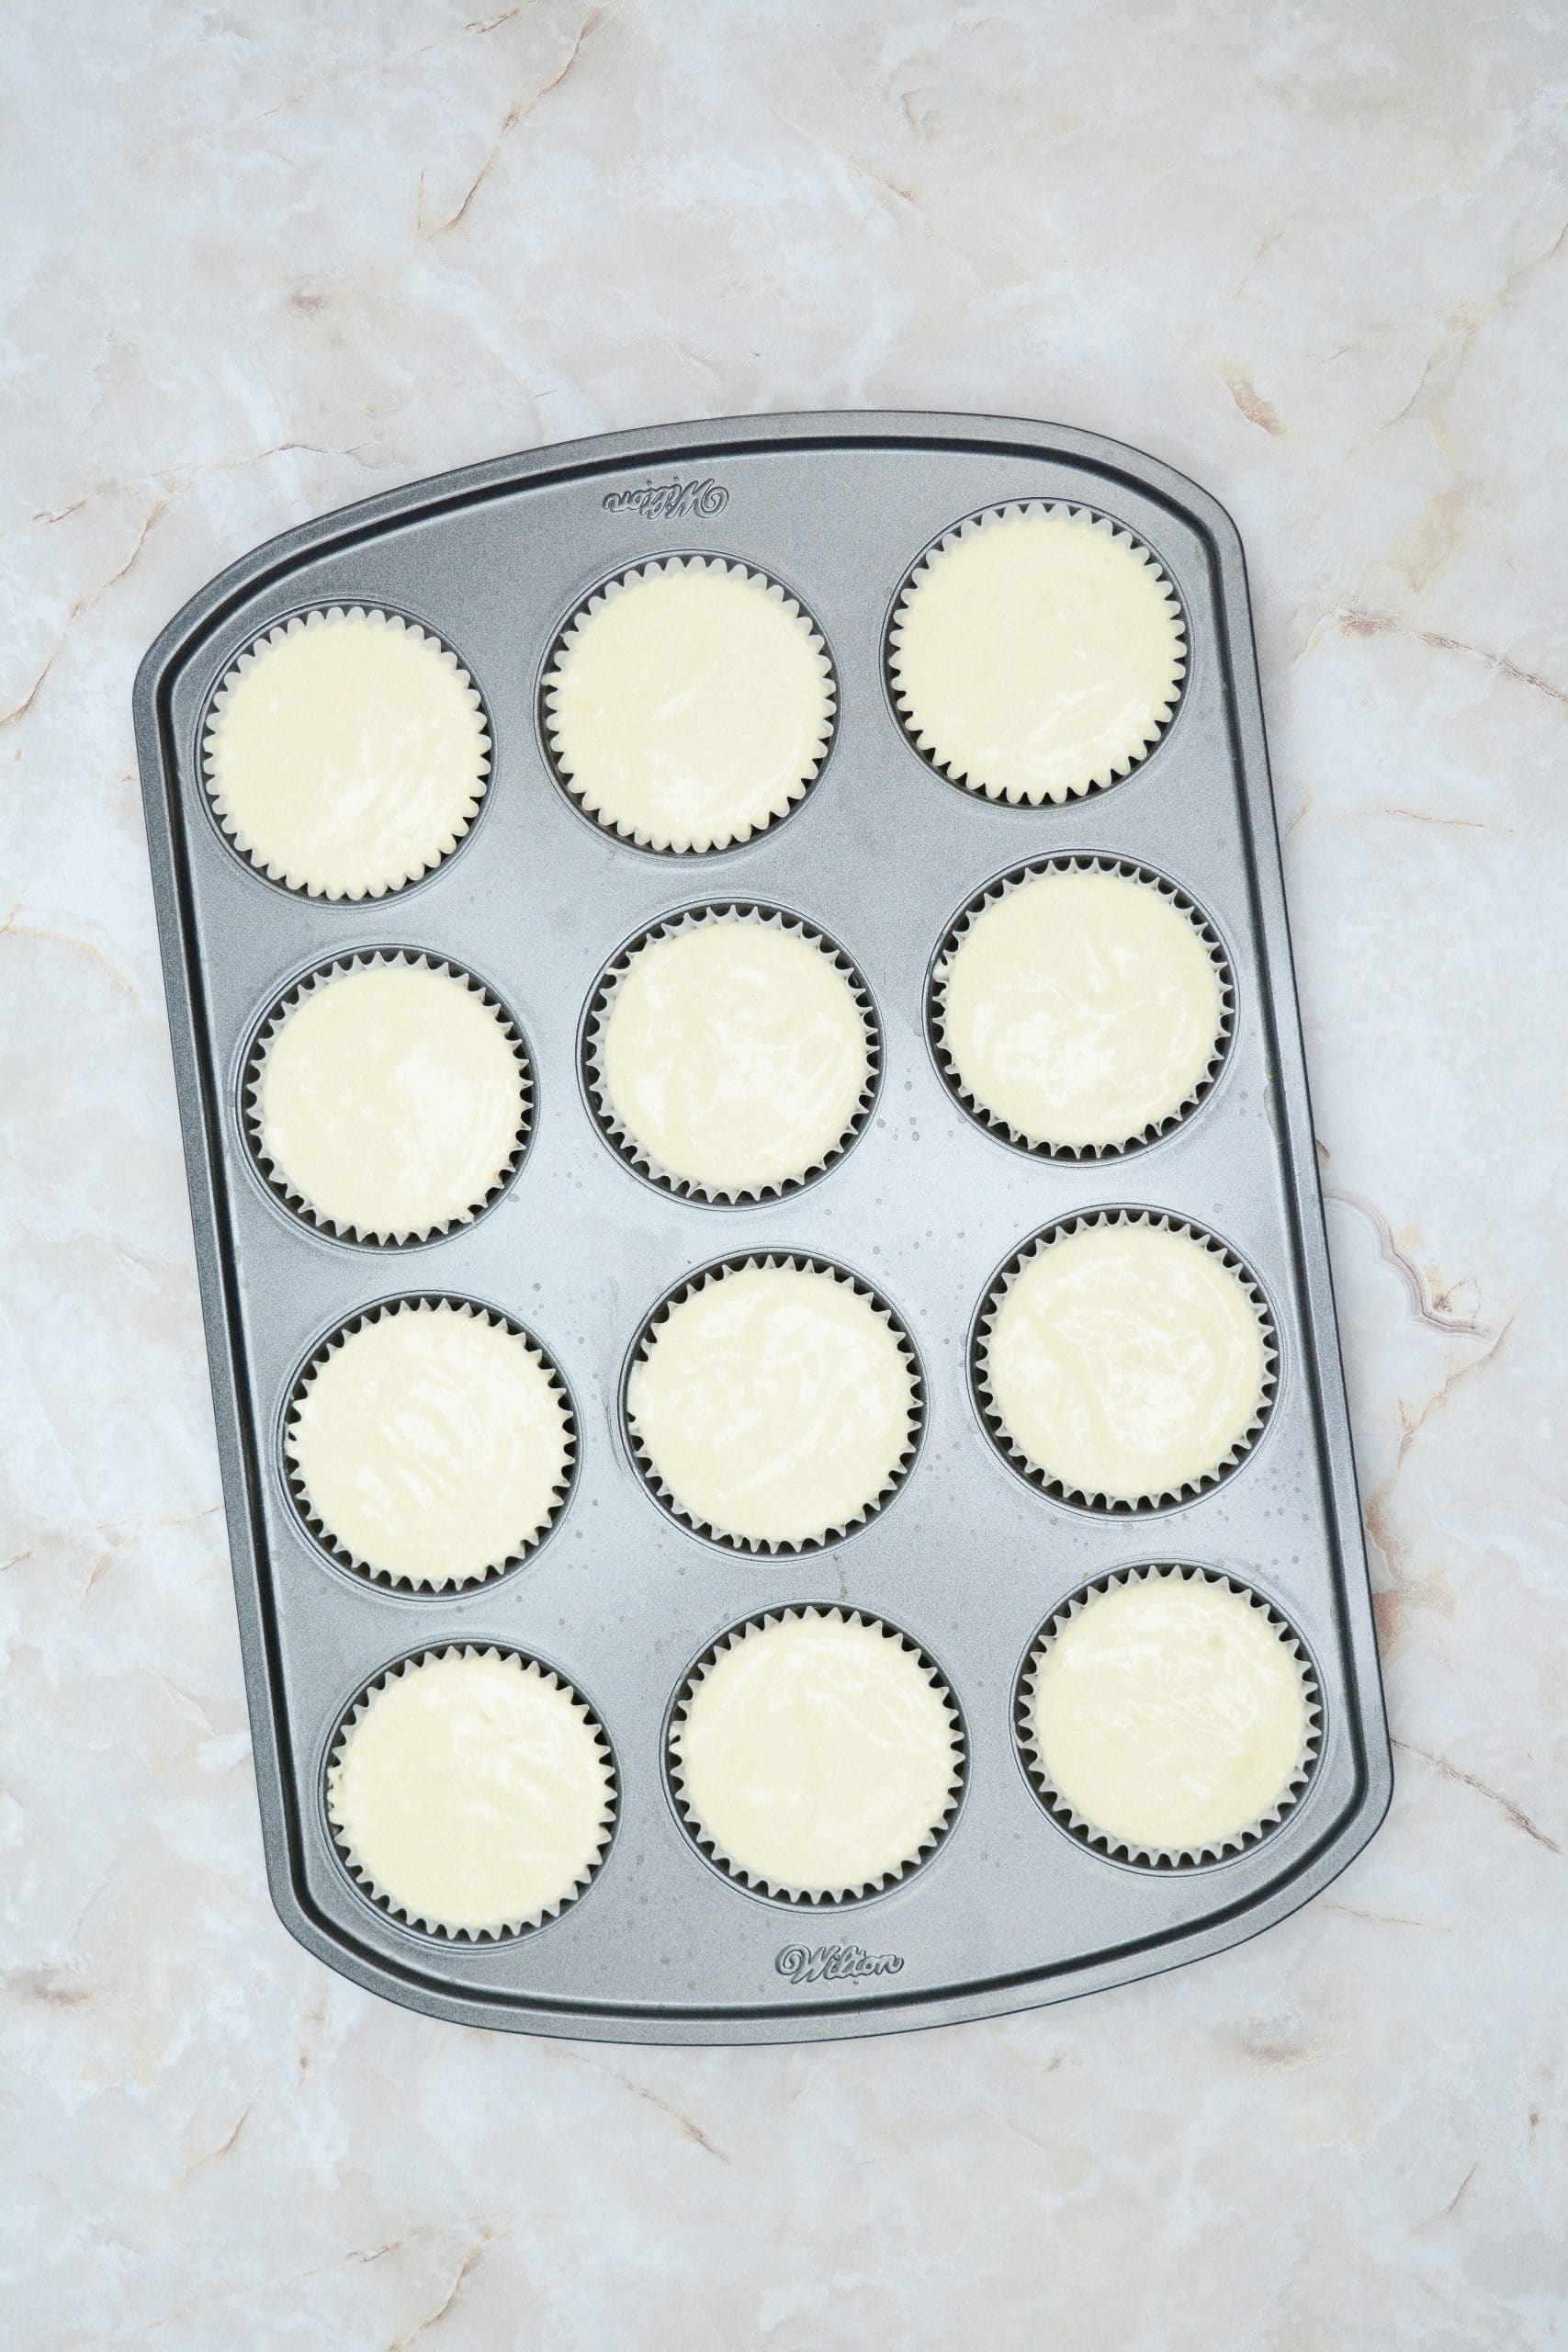 unbaked mini cheesecakes in a cupcake tin